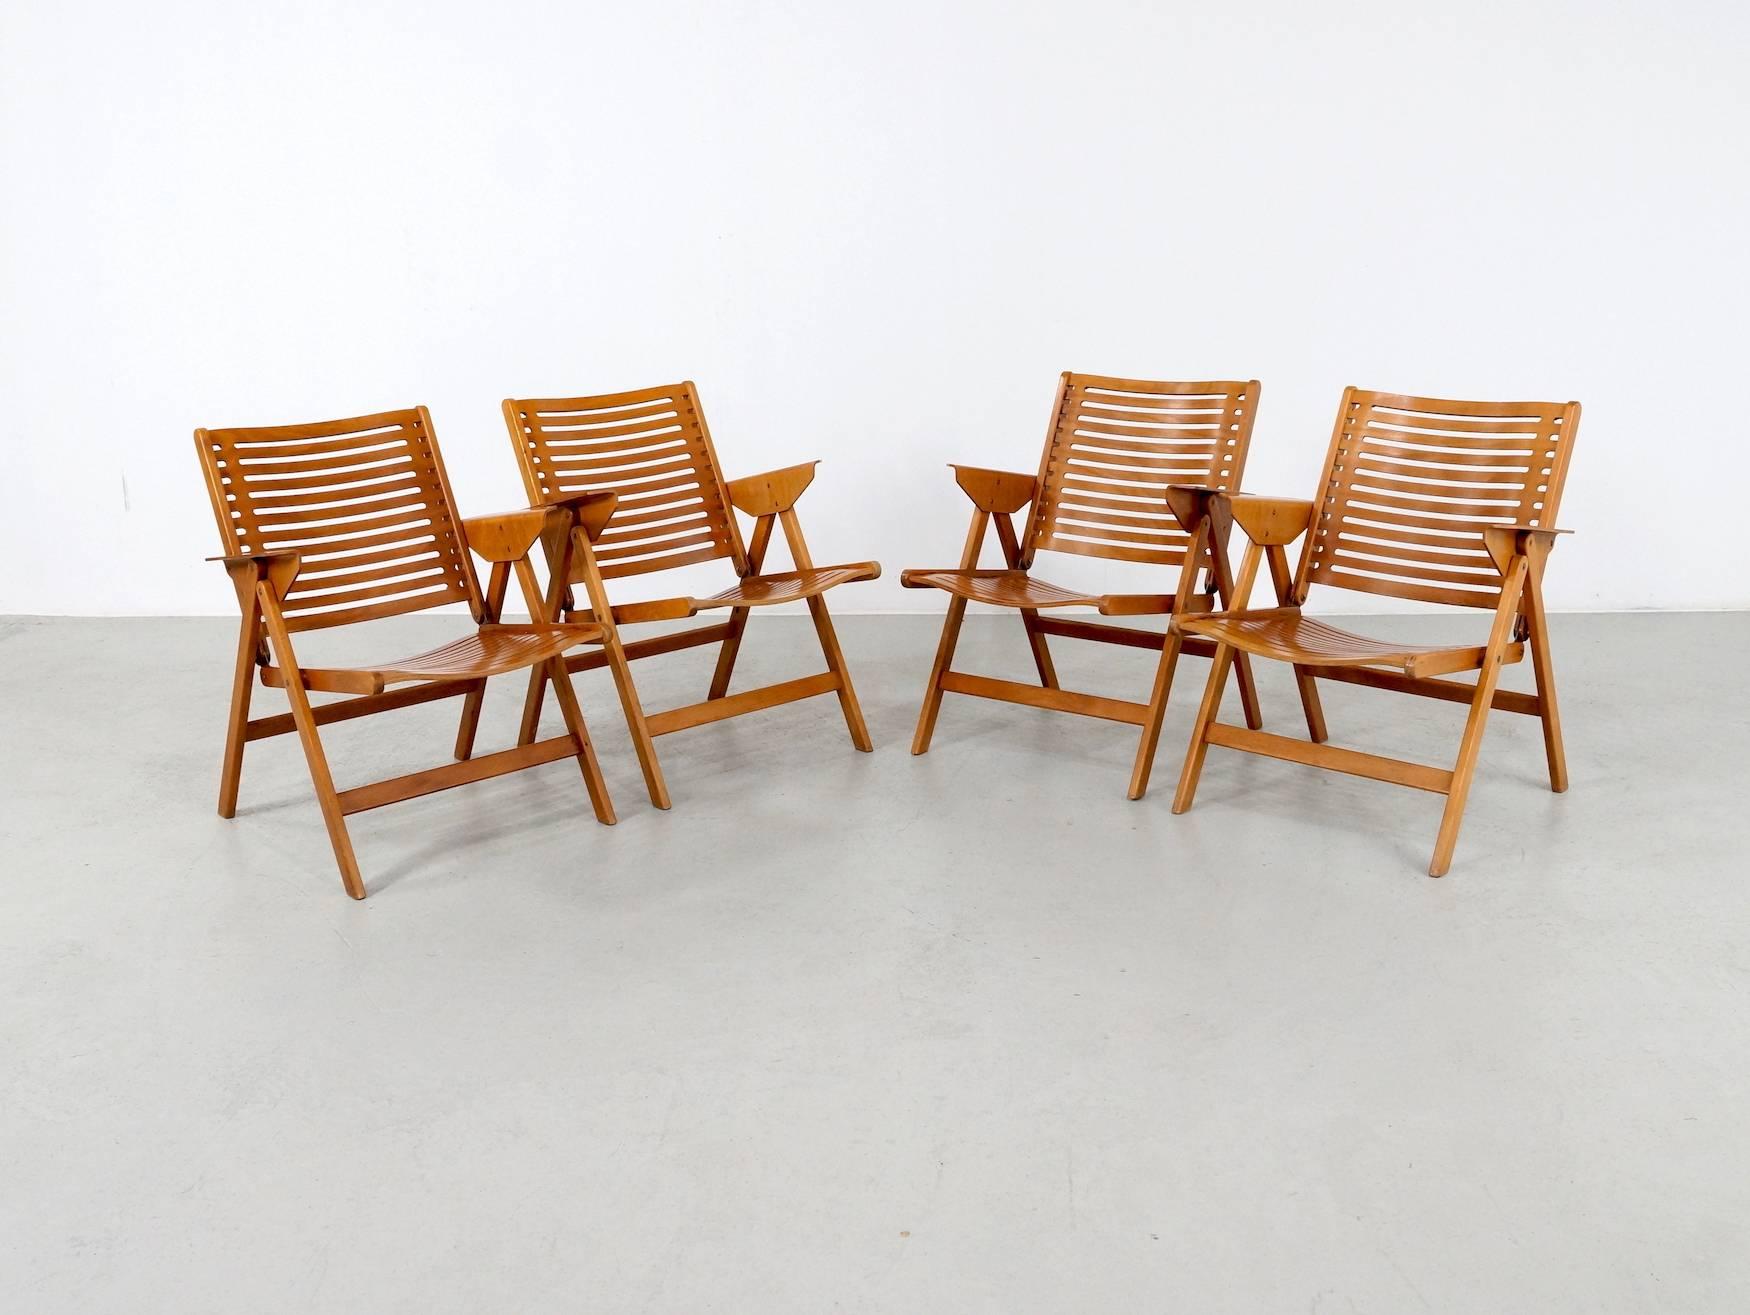 This set of four foldable easy chairs model Rex, this chair is designed by Niko Kralj and manufactured by Stol in Slovenia. The chairs are made of plywood and beech and remain in a good original vintage condition.The Rex chair was designed in 1952